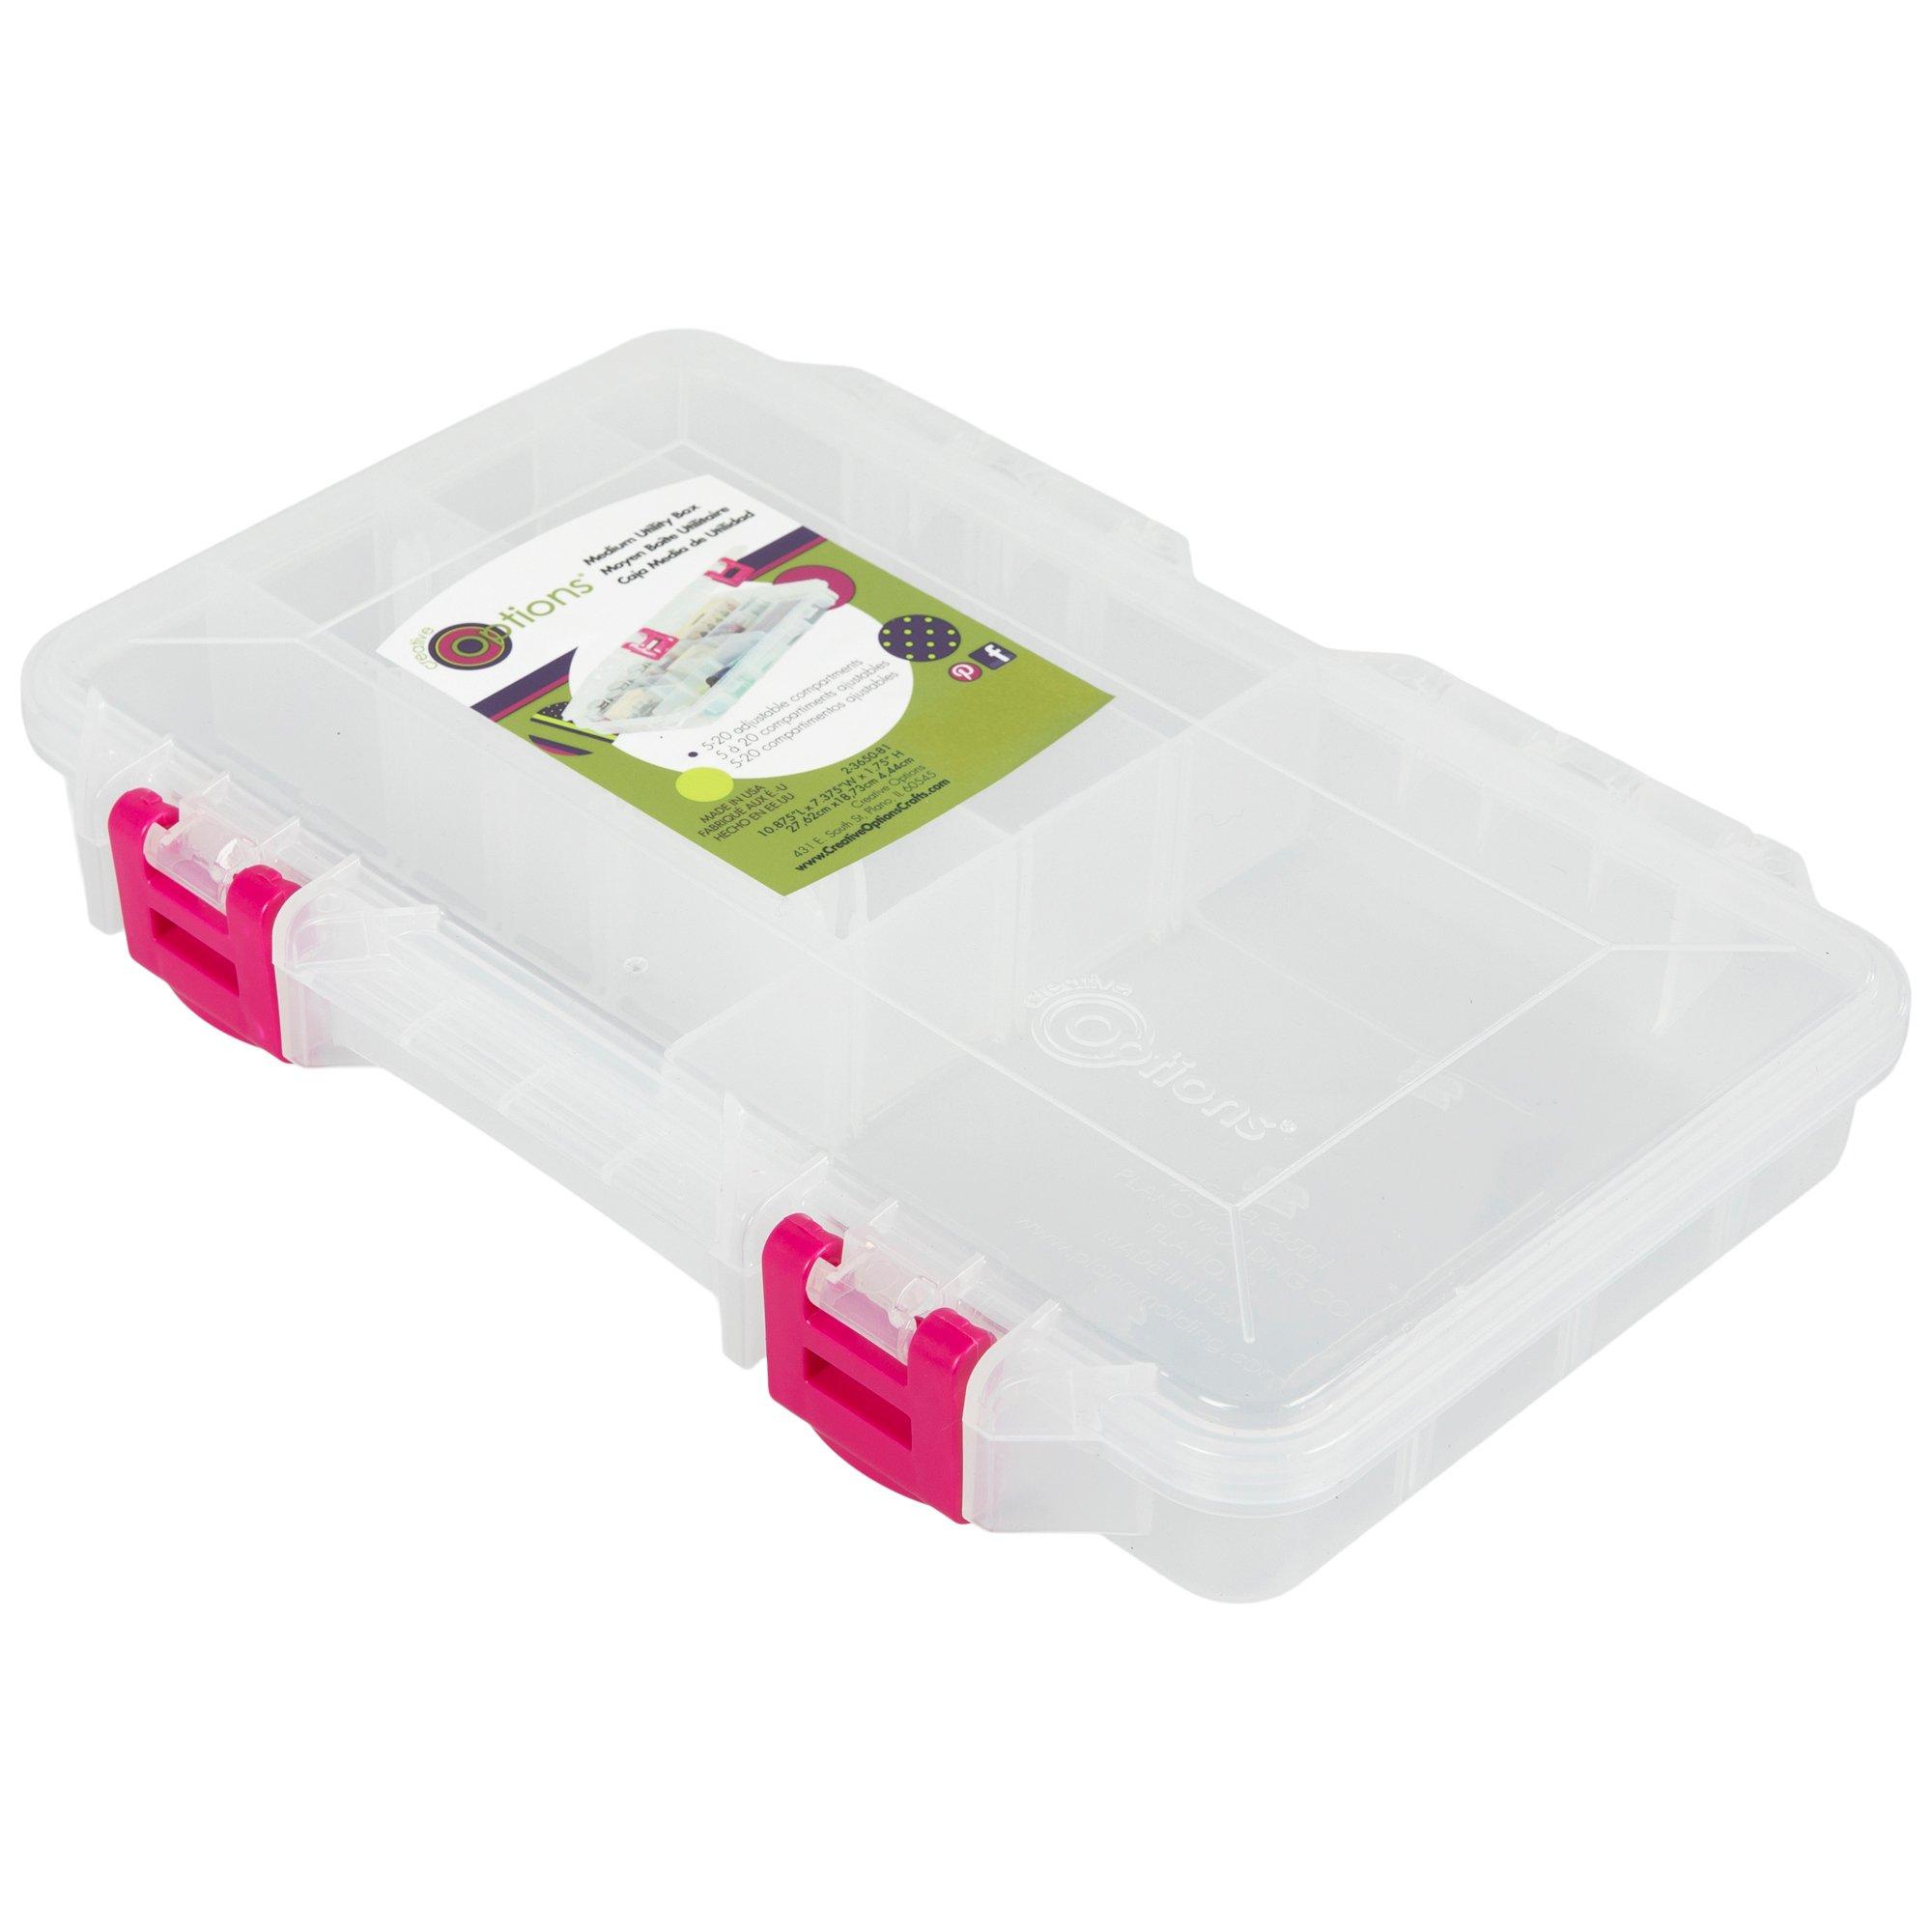 Plastic Creative Options Storage Containers with Adjustable